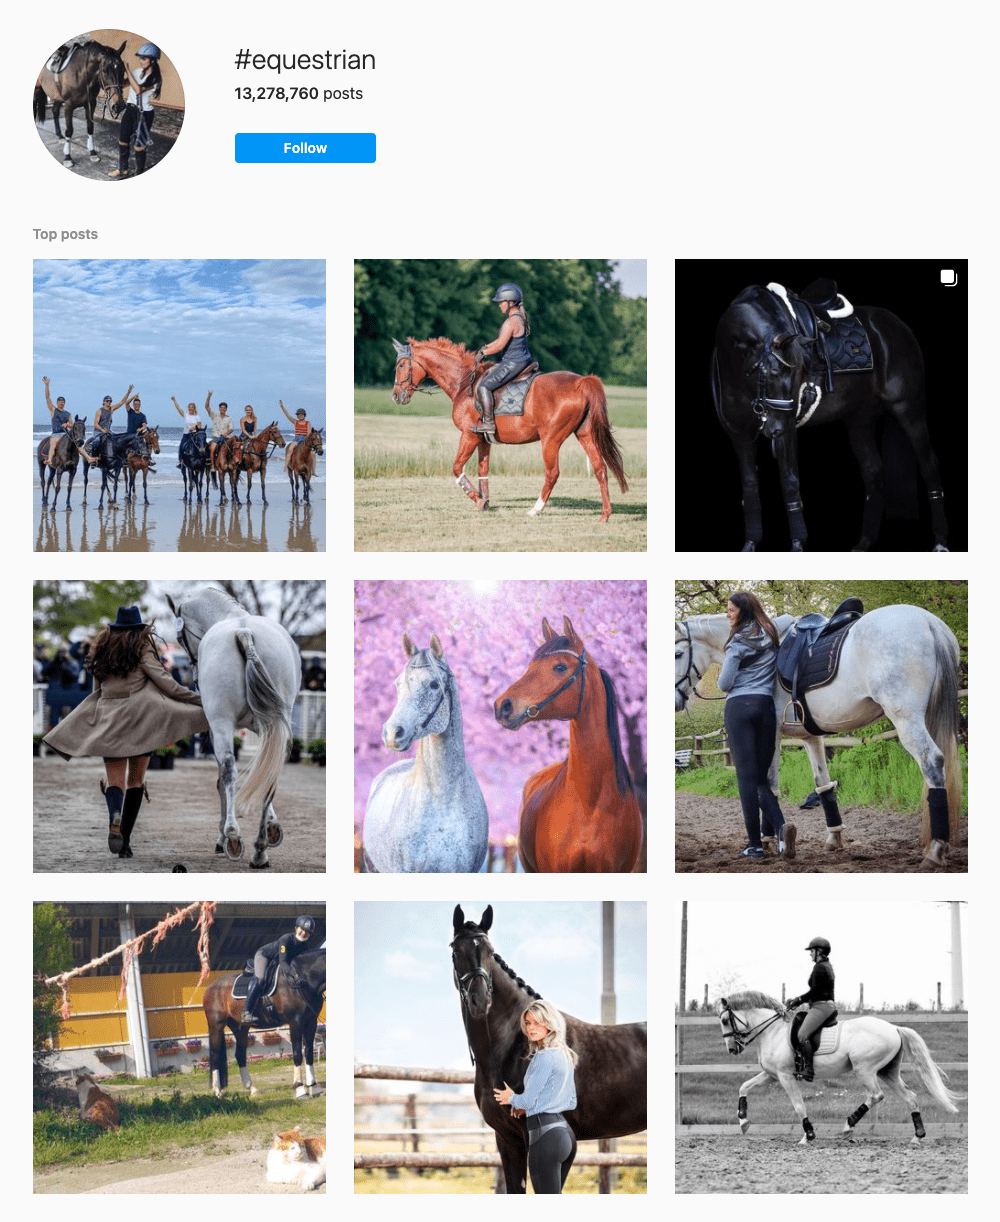 #equestrian Hashtags for Instagram